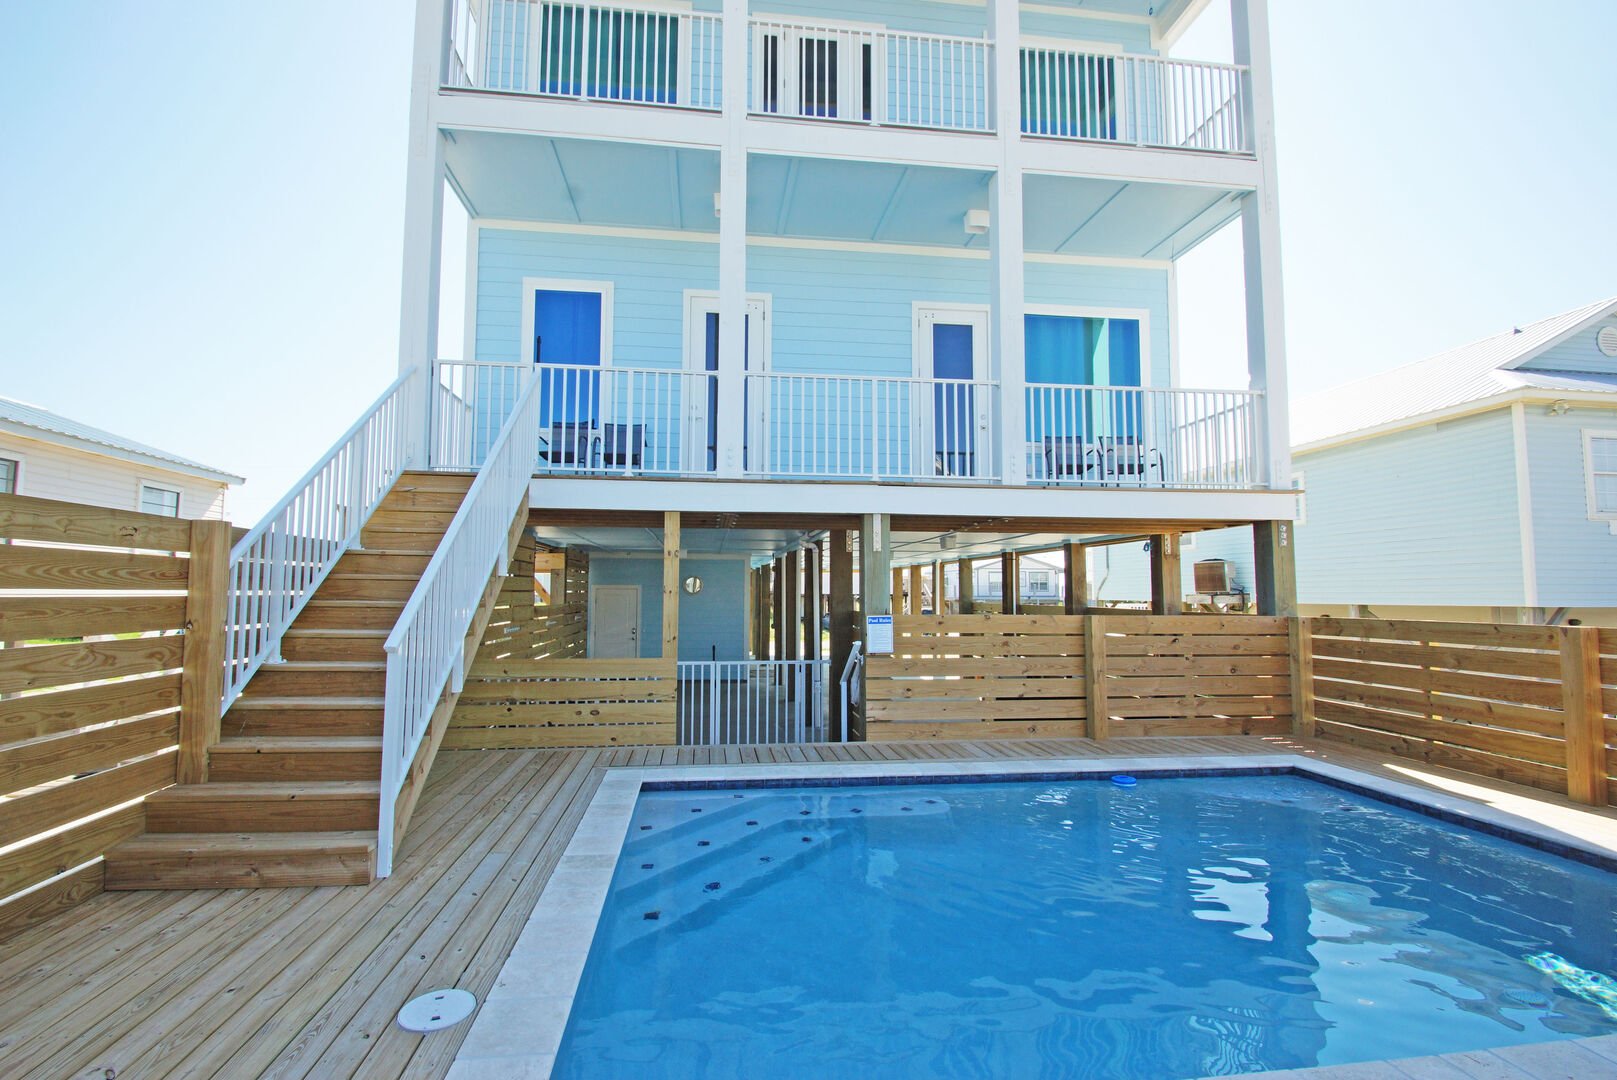 Pool view at one of our FlipKey Fort Morgan rentals